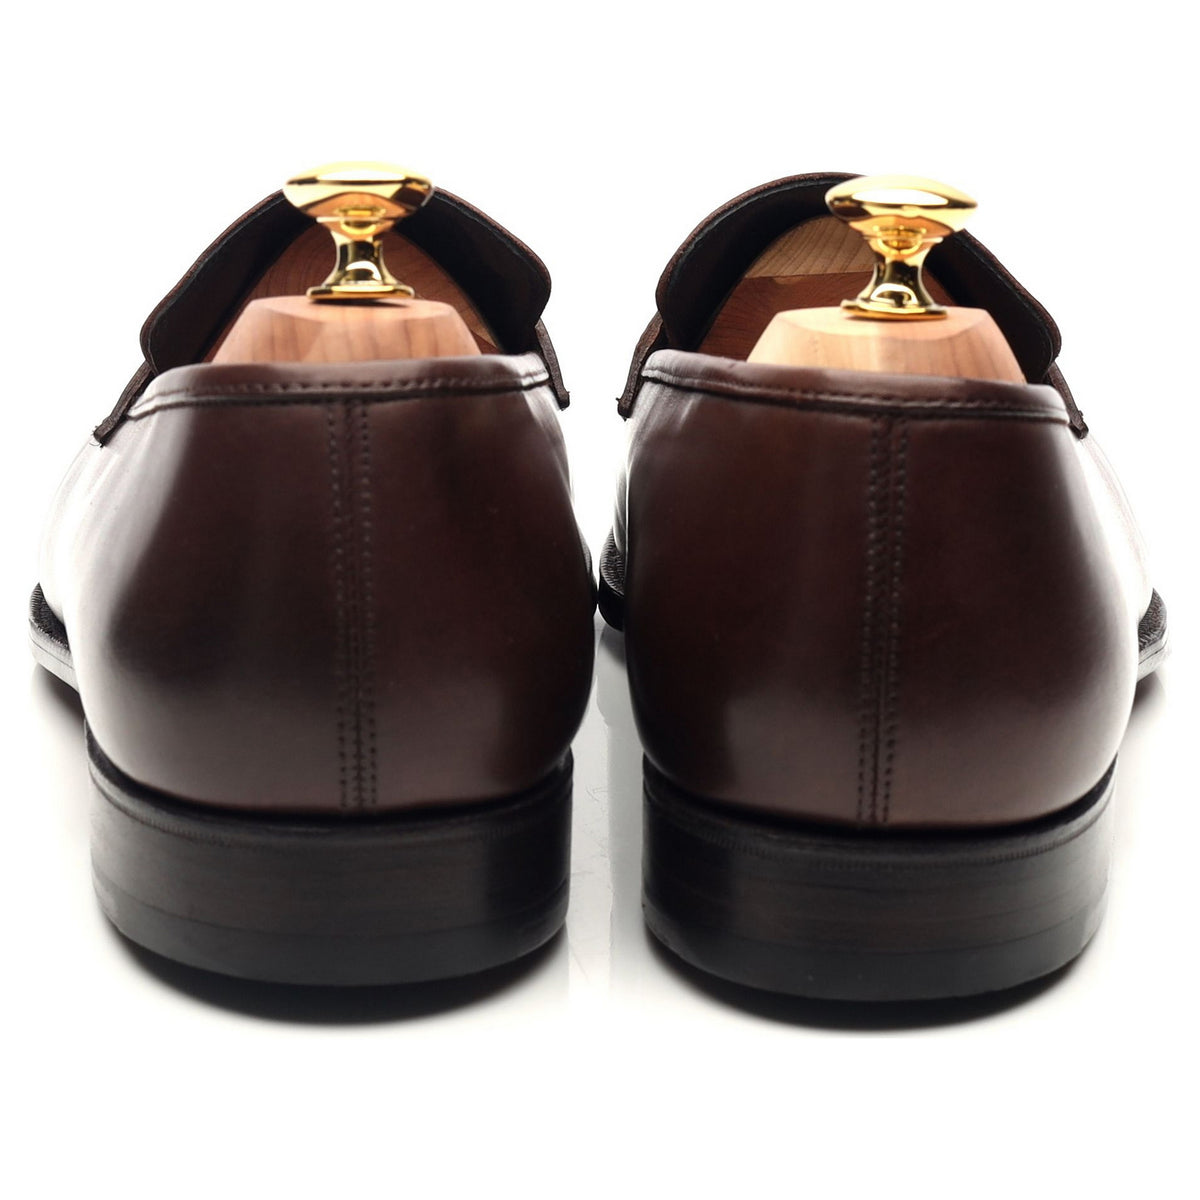 Dark Brown Leather Loafers UK 11.5 E